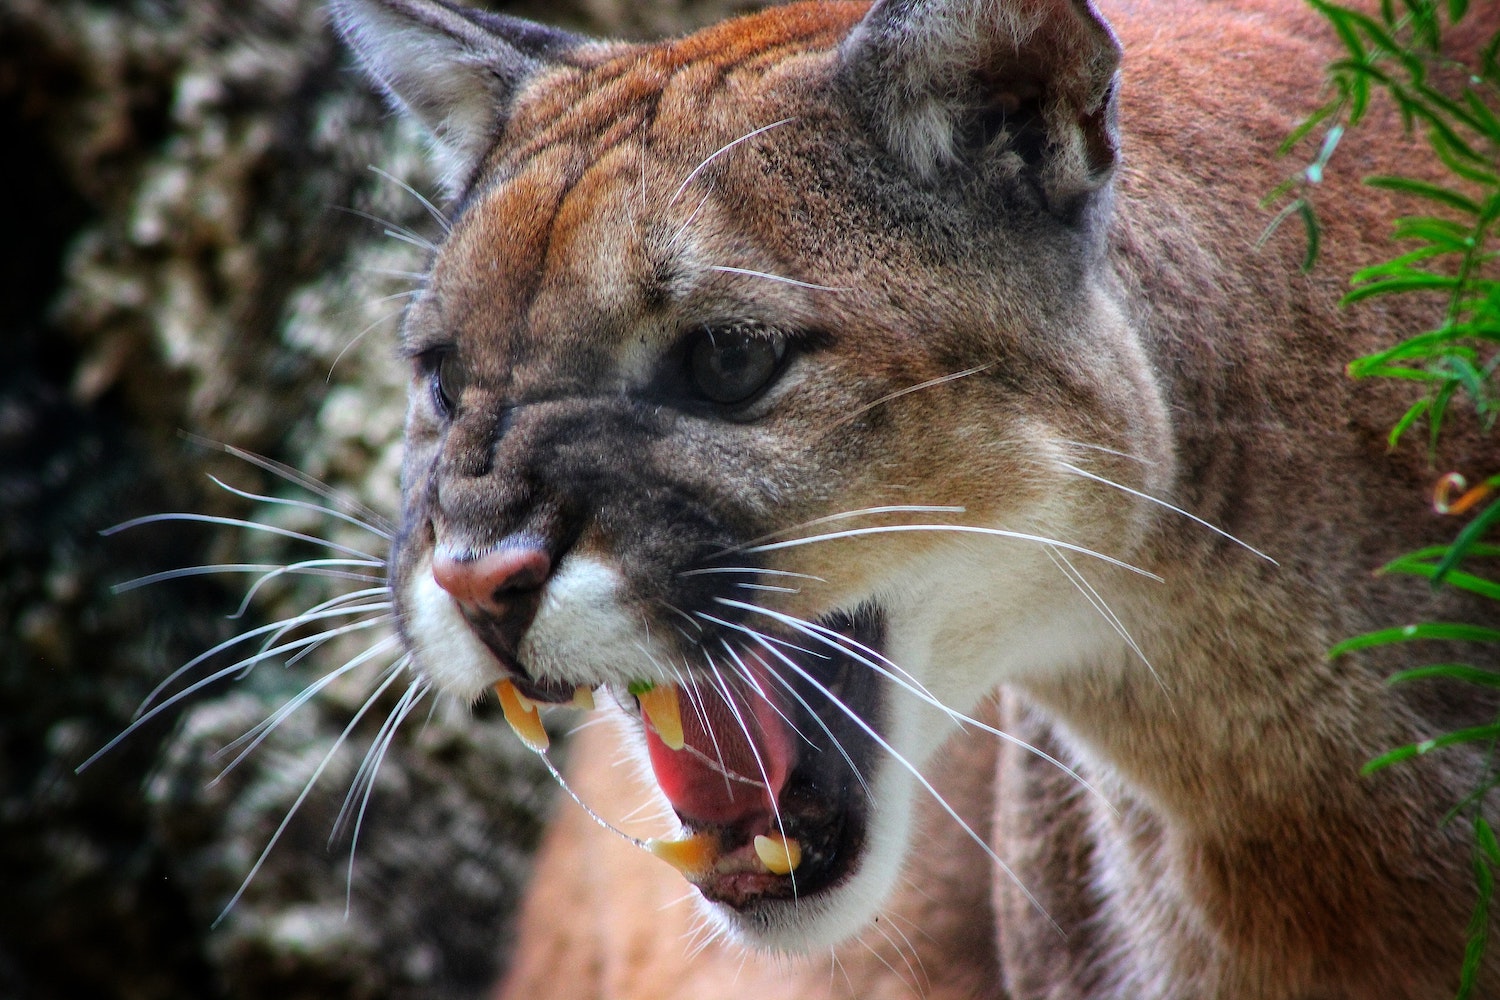 A mountain lion attacked a woman and her dog in California